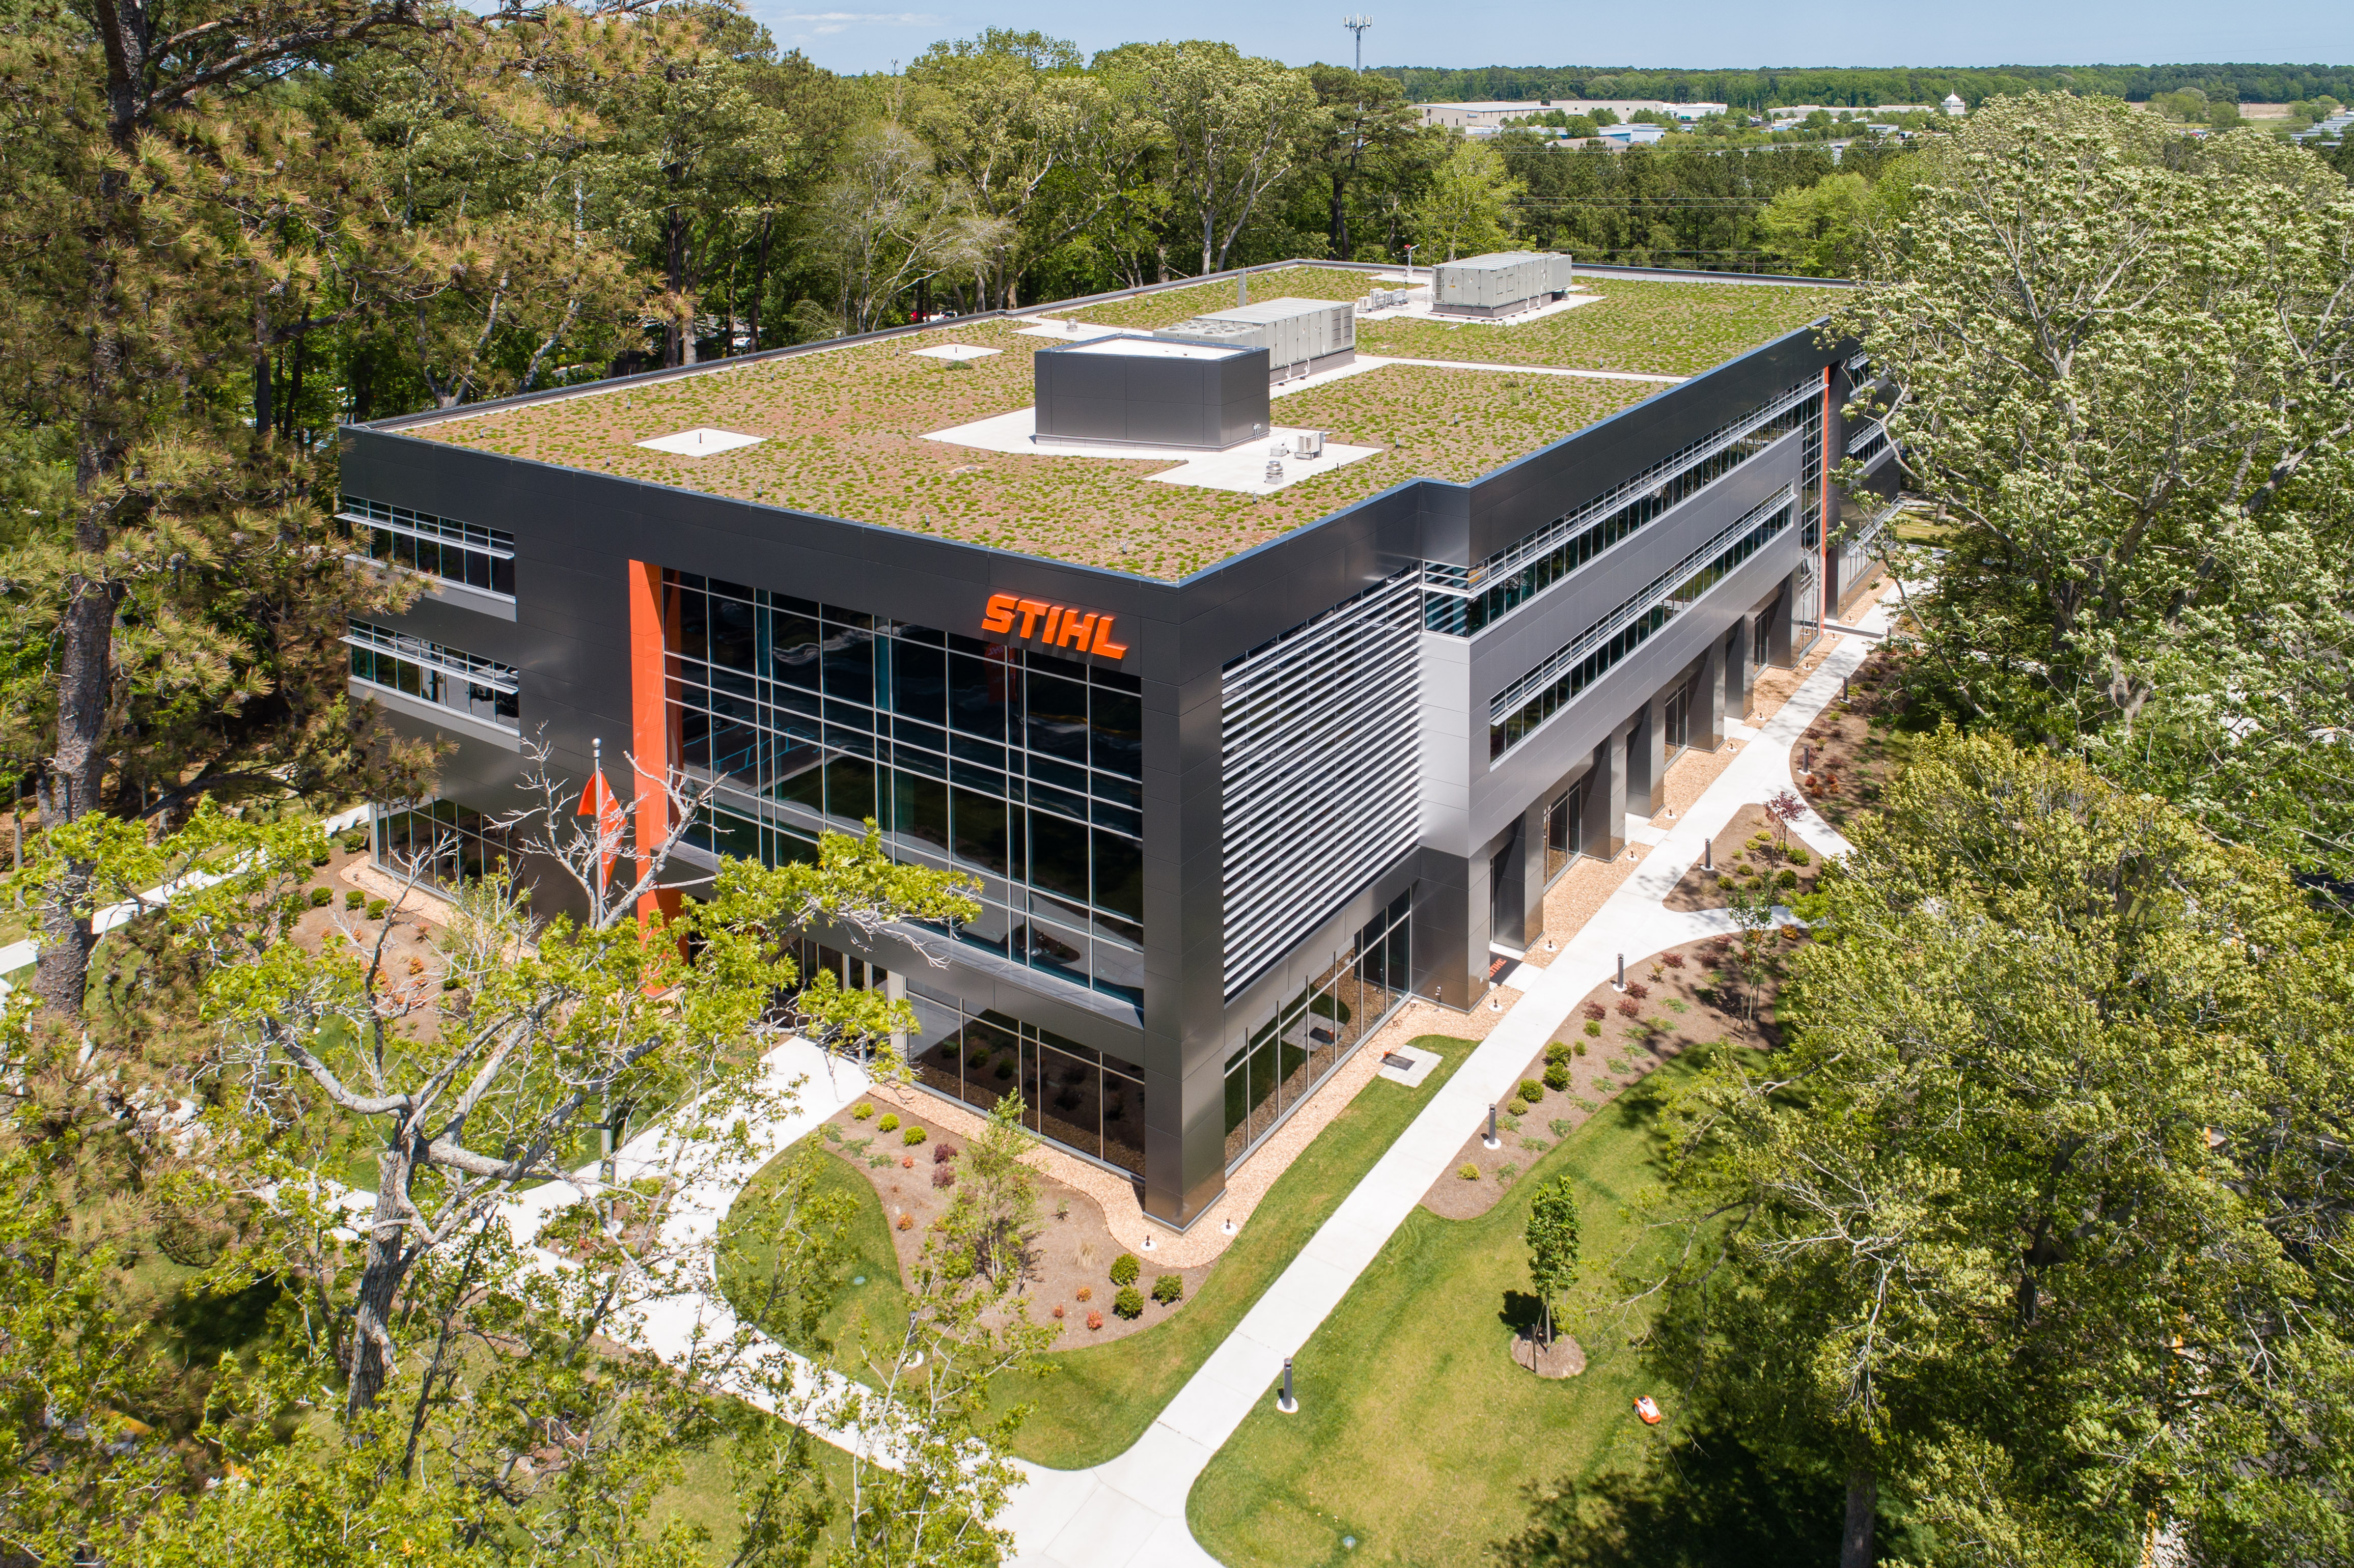 The STIHL Inc administration building in Virginia